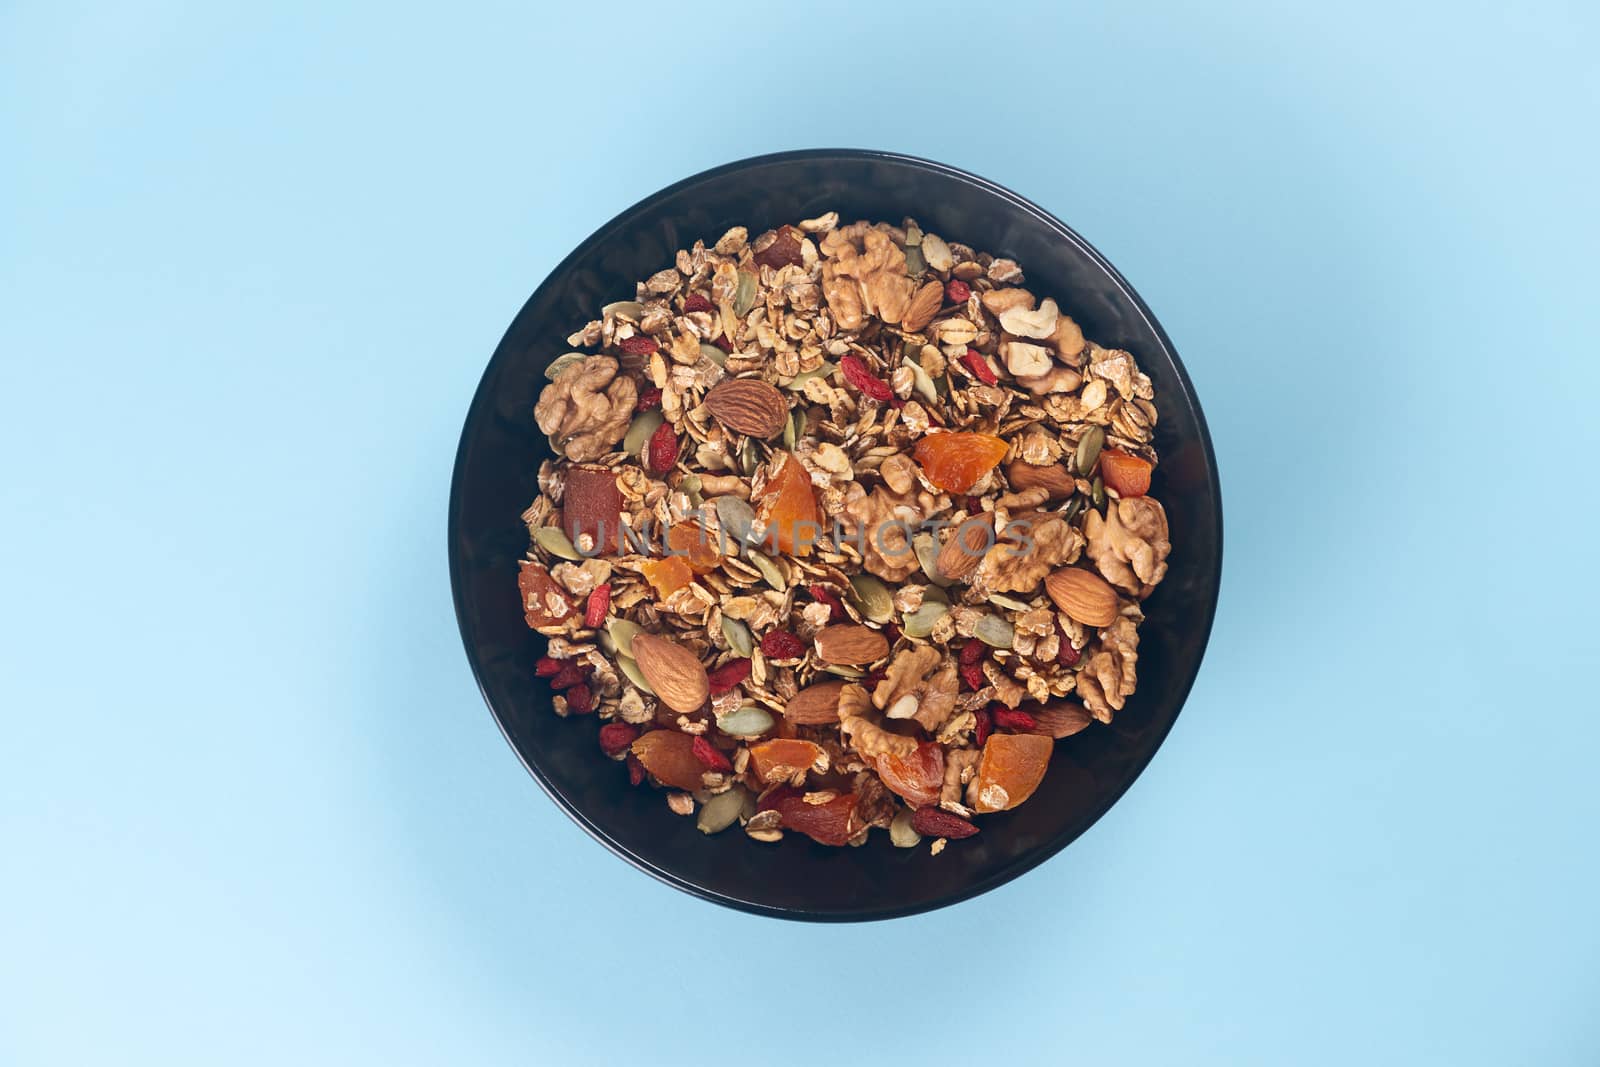 A fresh granola with dried and candied nuts and fruits in black bowl on blue bakground. Concept of nutrient and healty breakfast or meal